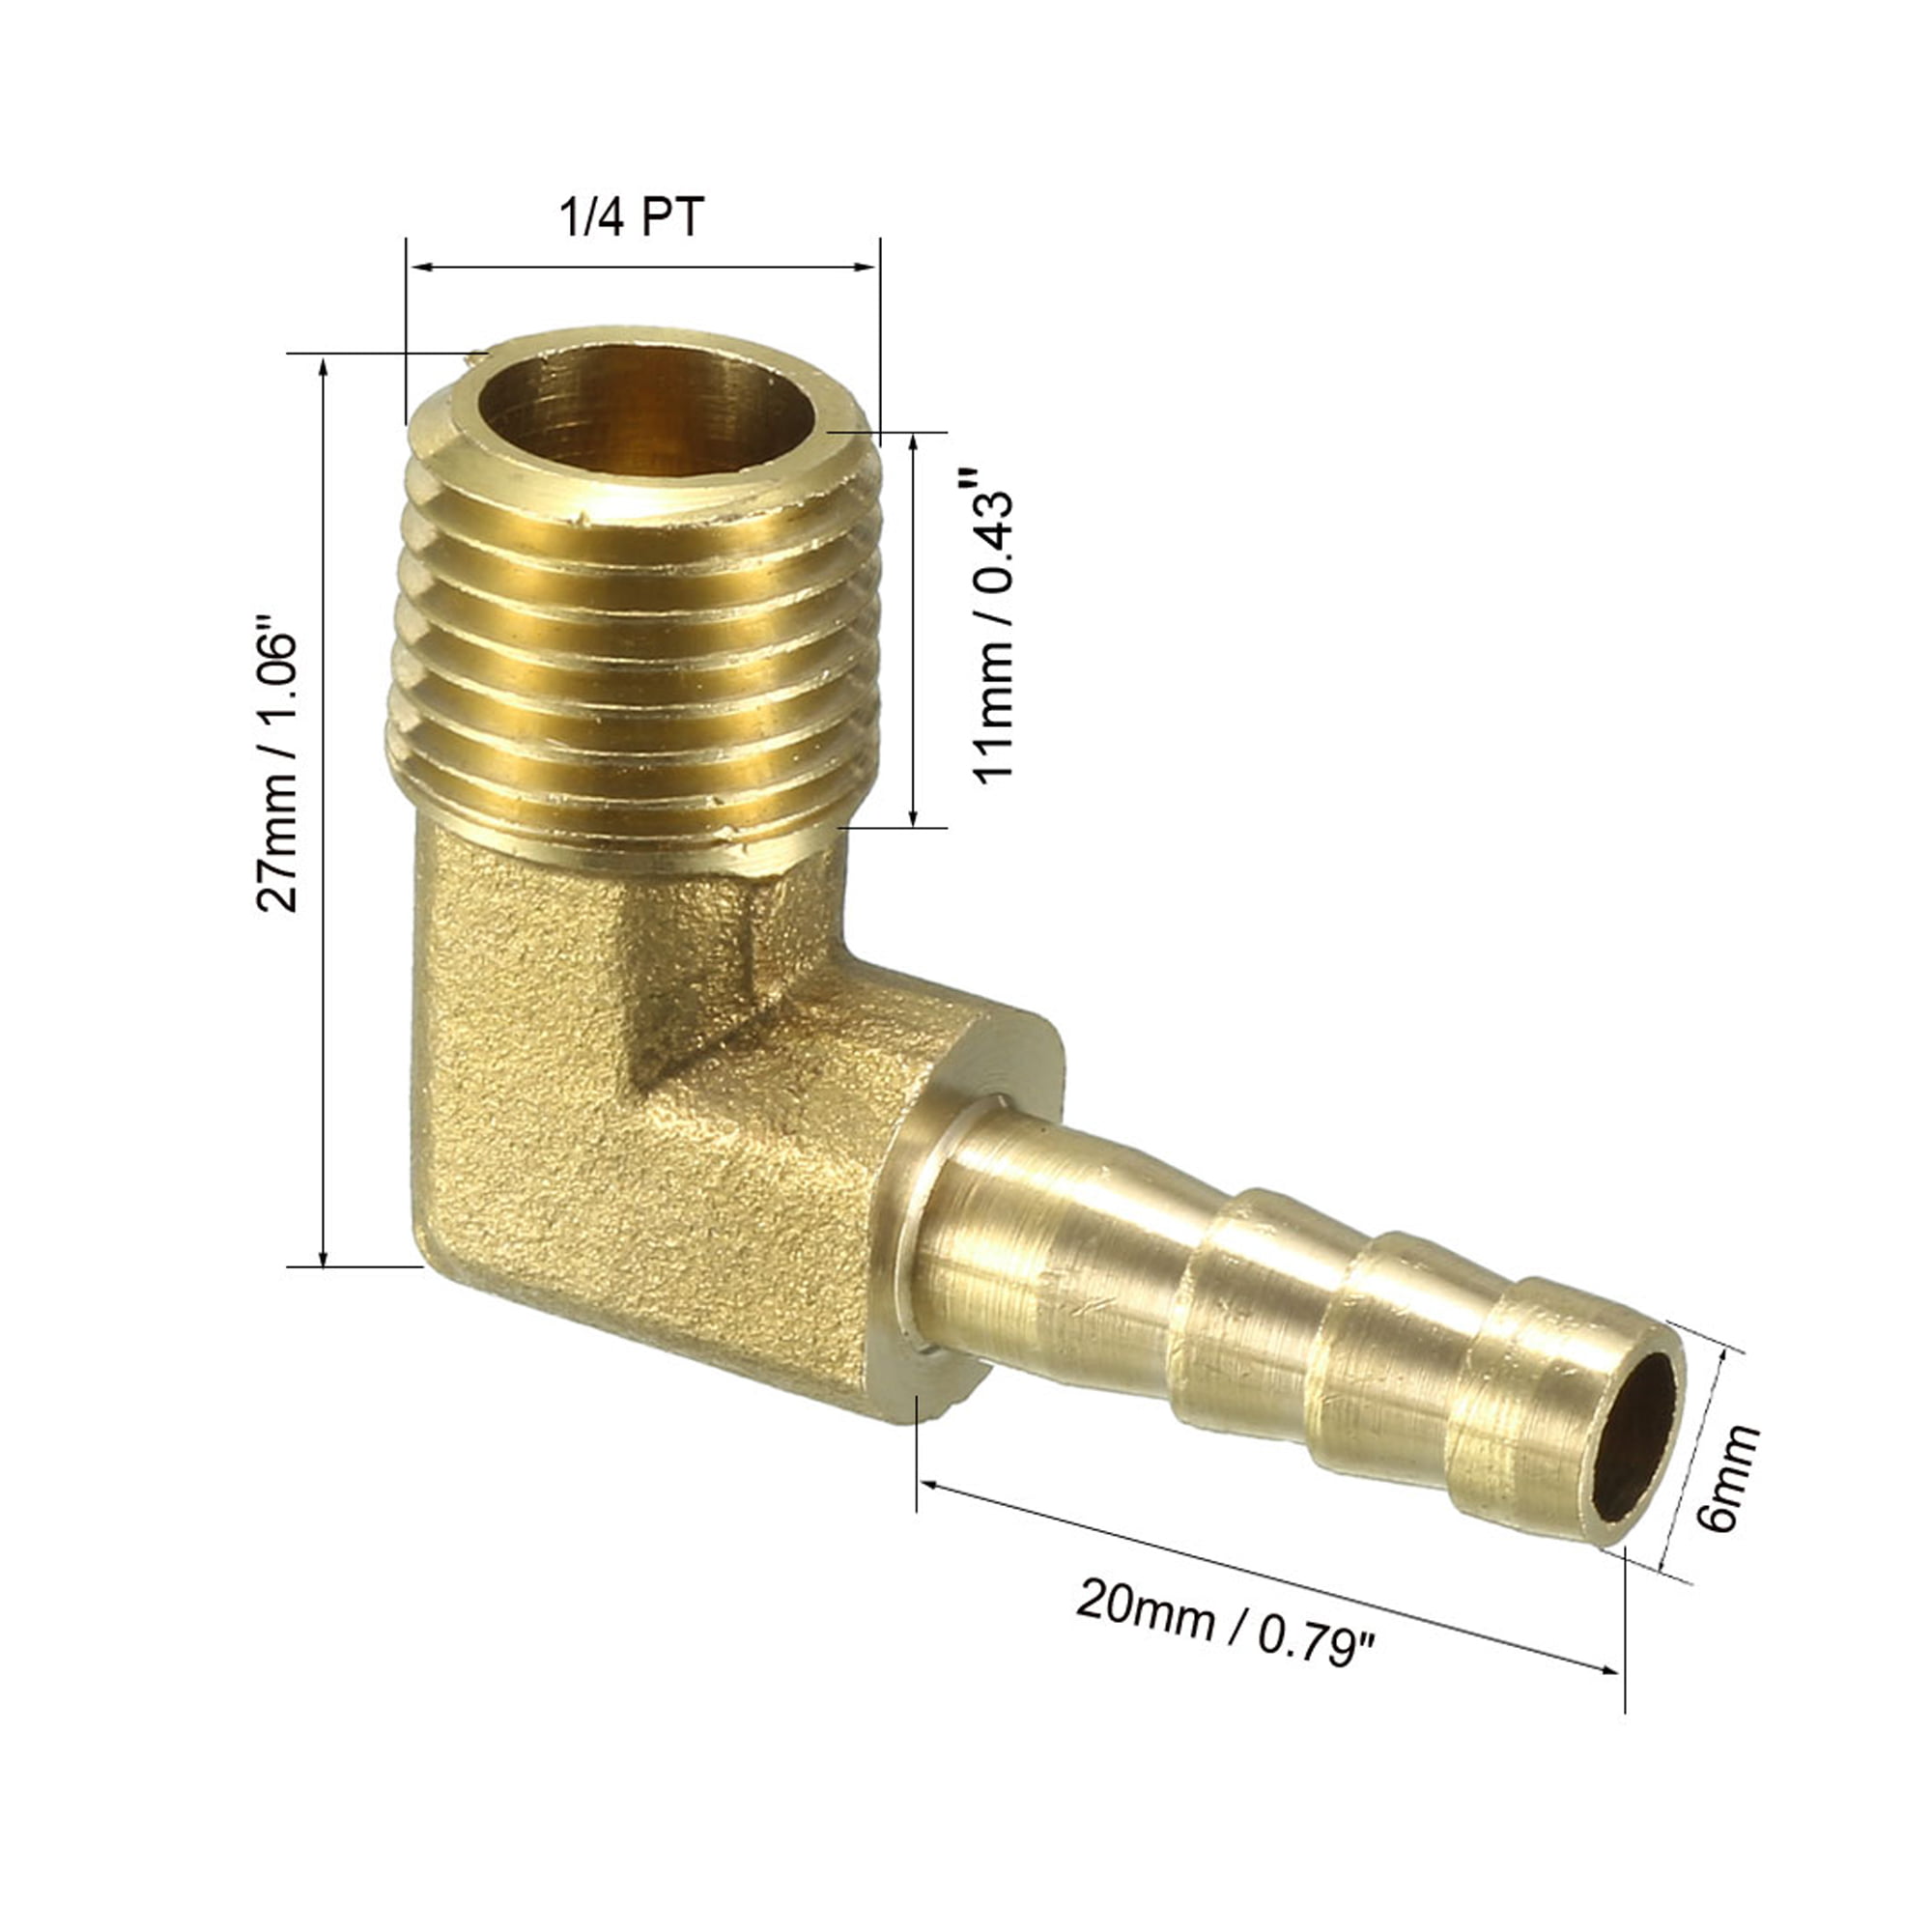 1/4 x 1/4-18 Brass 1/4 x 1/4-18 Tompkins 4315-04-04 Push-On Hose Barb Fitting Push-On Barb to Female Pipe 